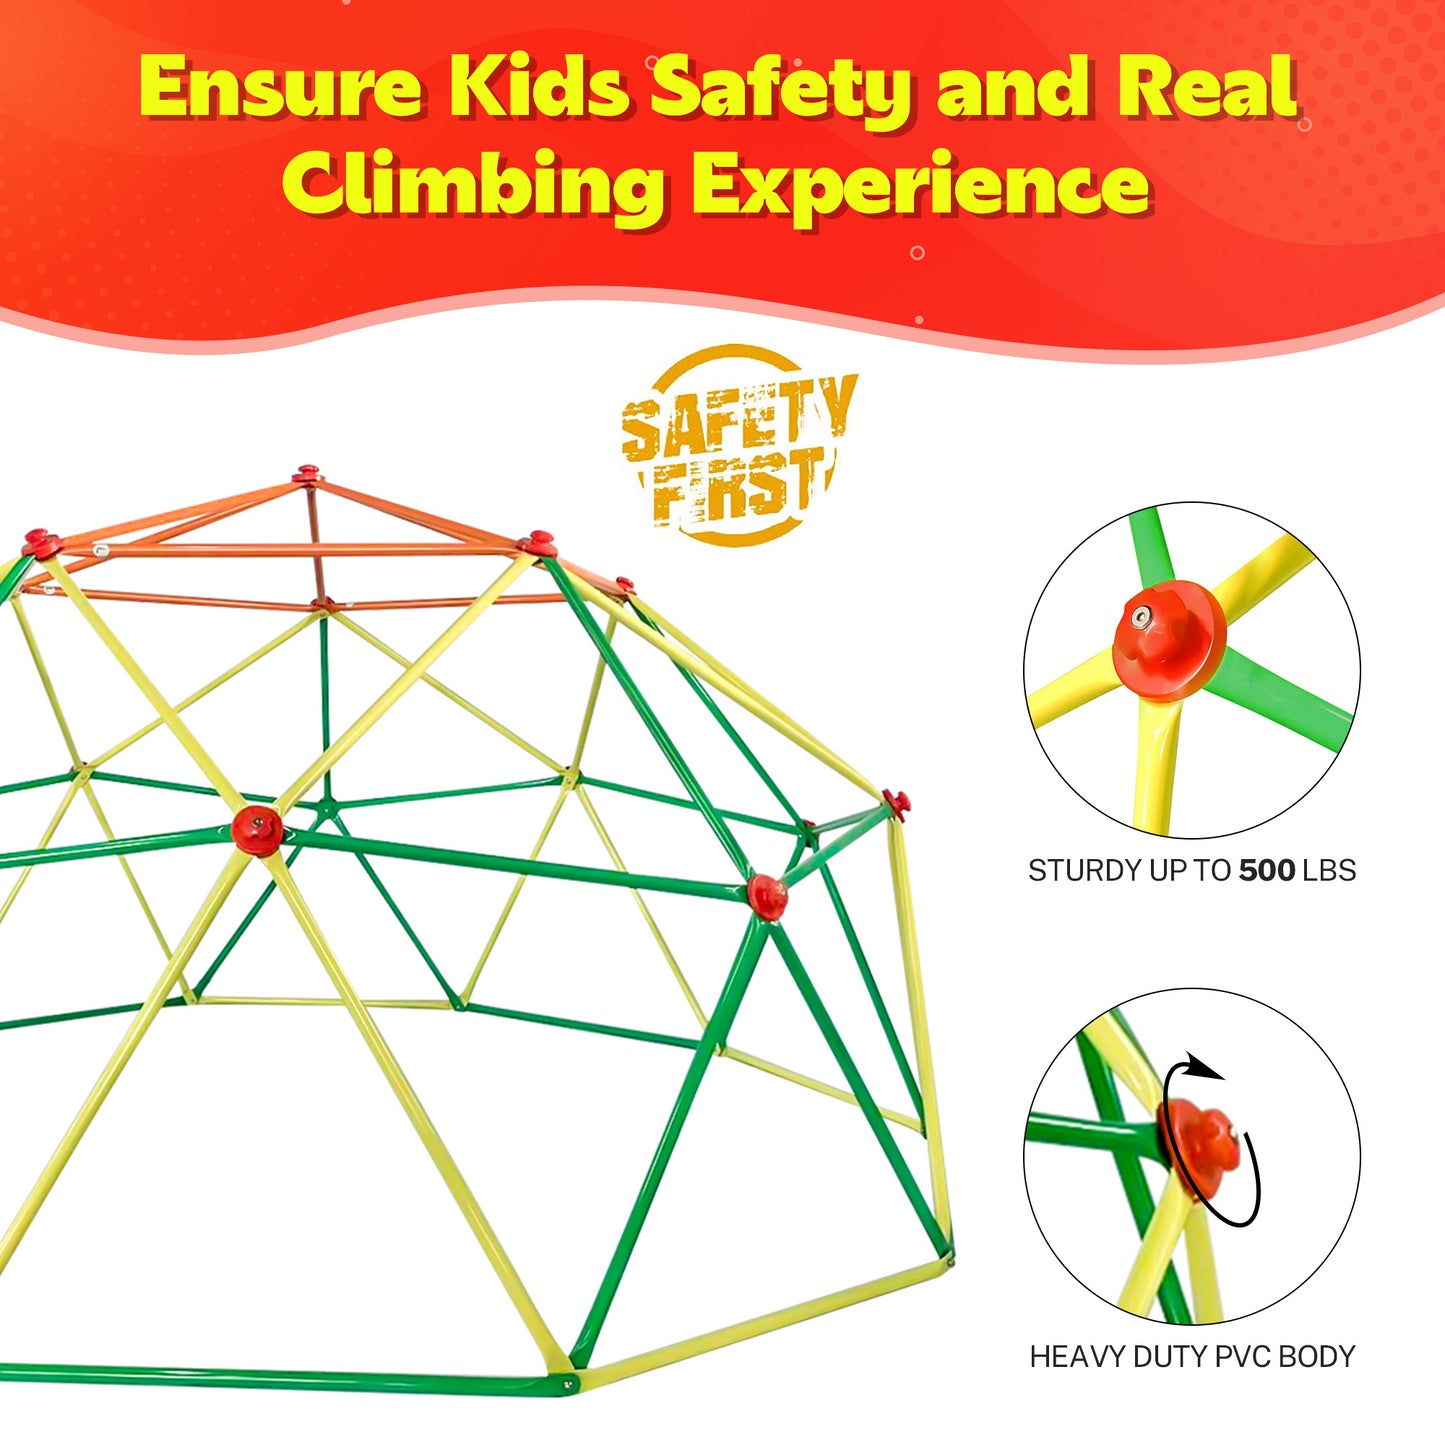 6ft Climbing Dome, SYNGAR Kids Outdoor Geometric Dome Climber, Jungle Gym Dome for Boys/Girls Age 3-12 Years, Children Play Center, Support up to 500 lbs, D5599